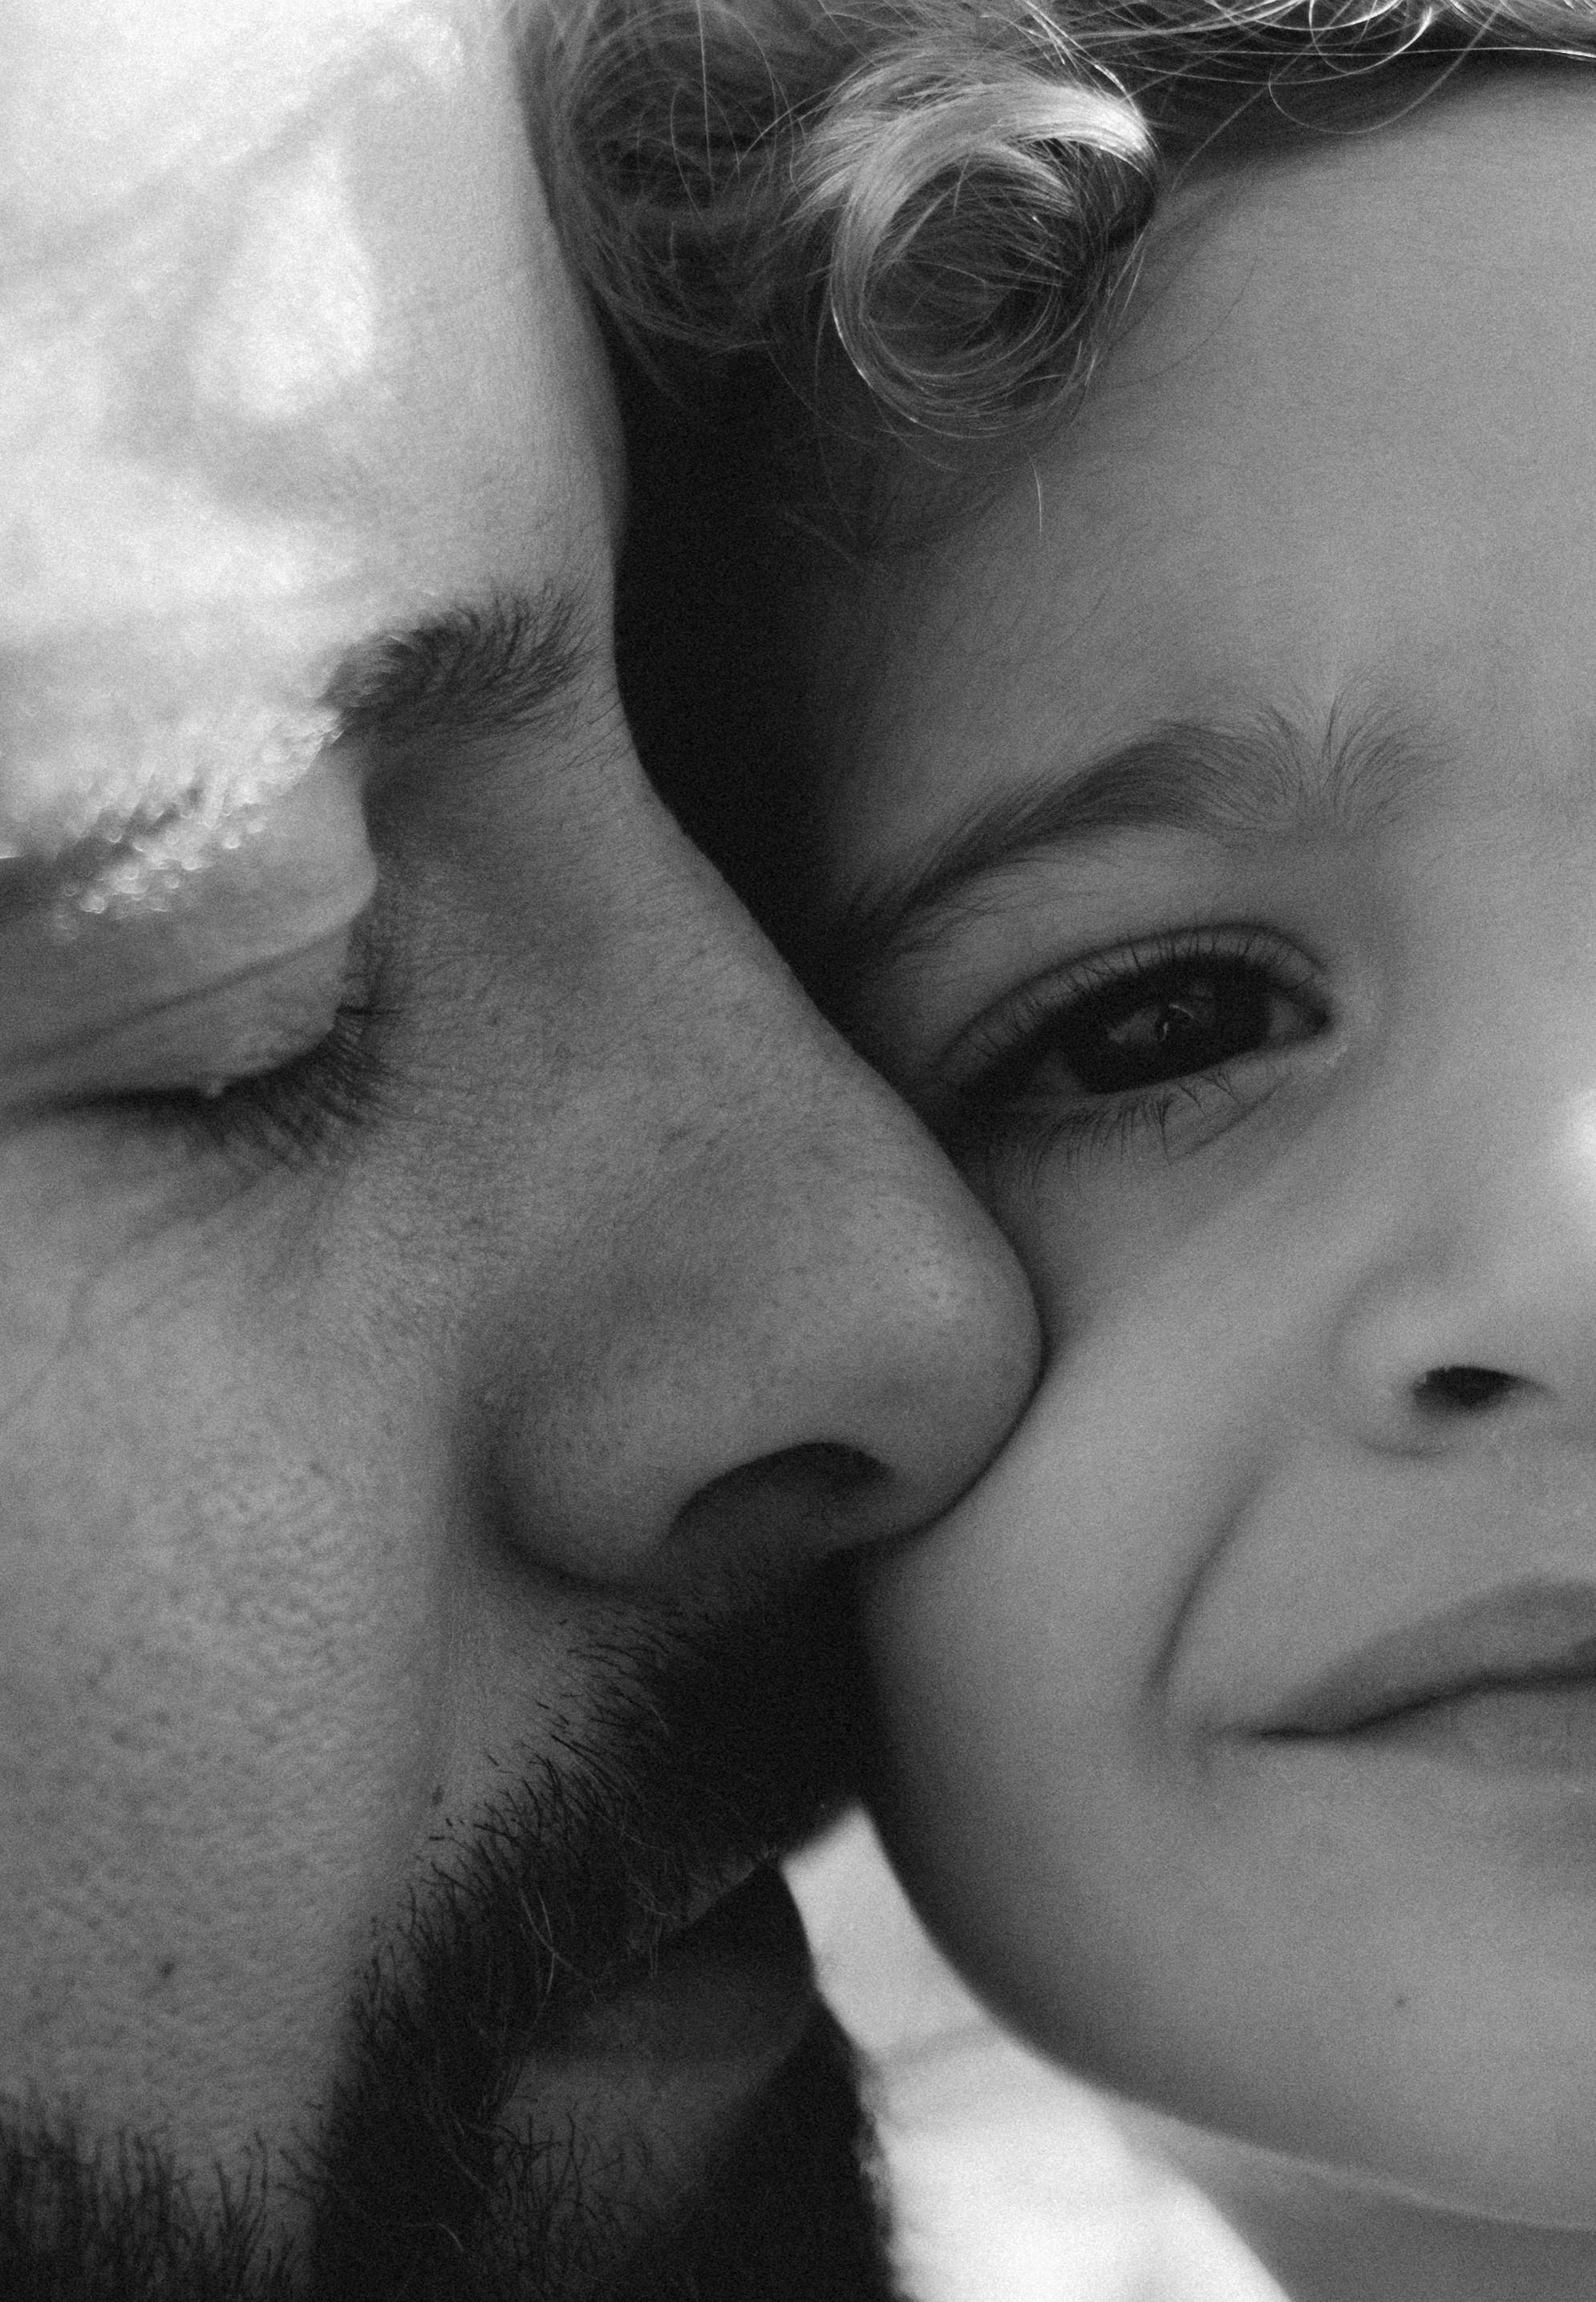 A close-up shot of a father and son | Source: Pexels